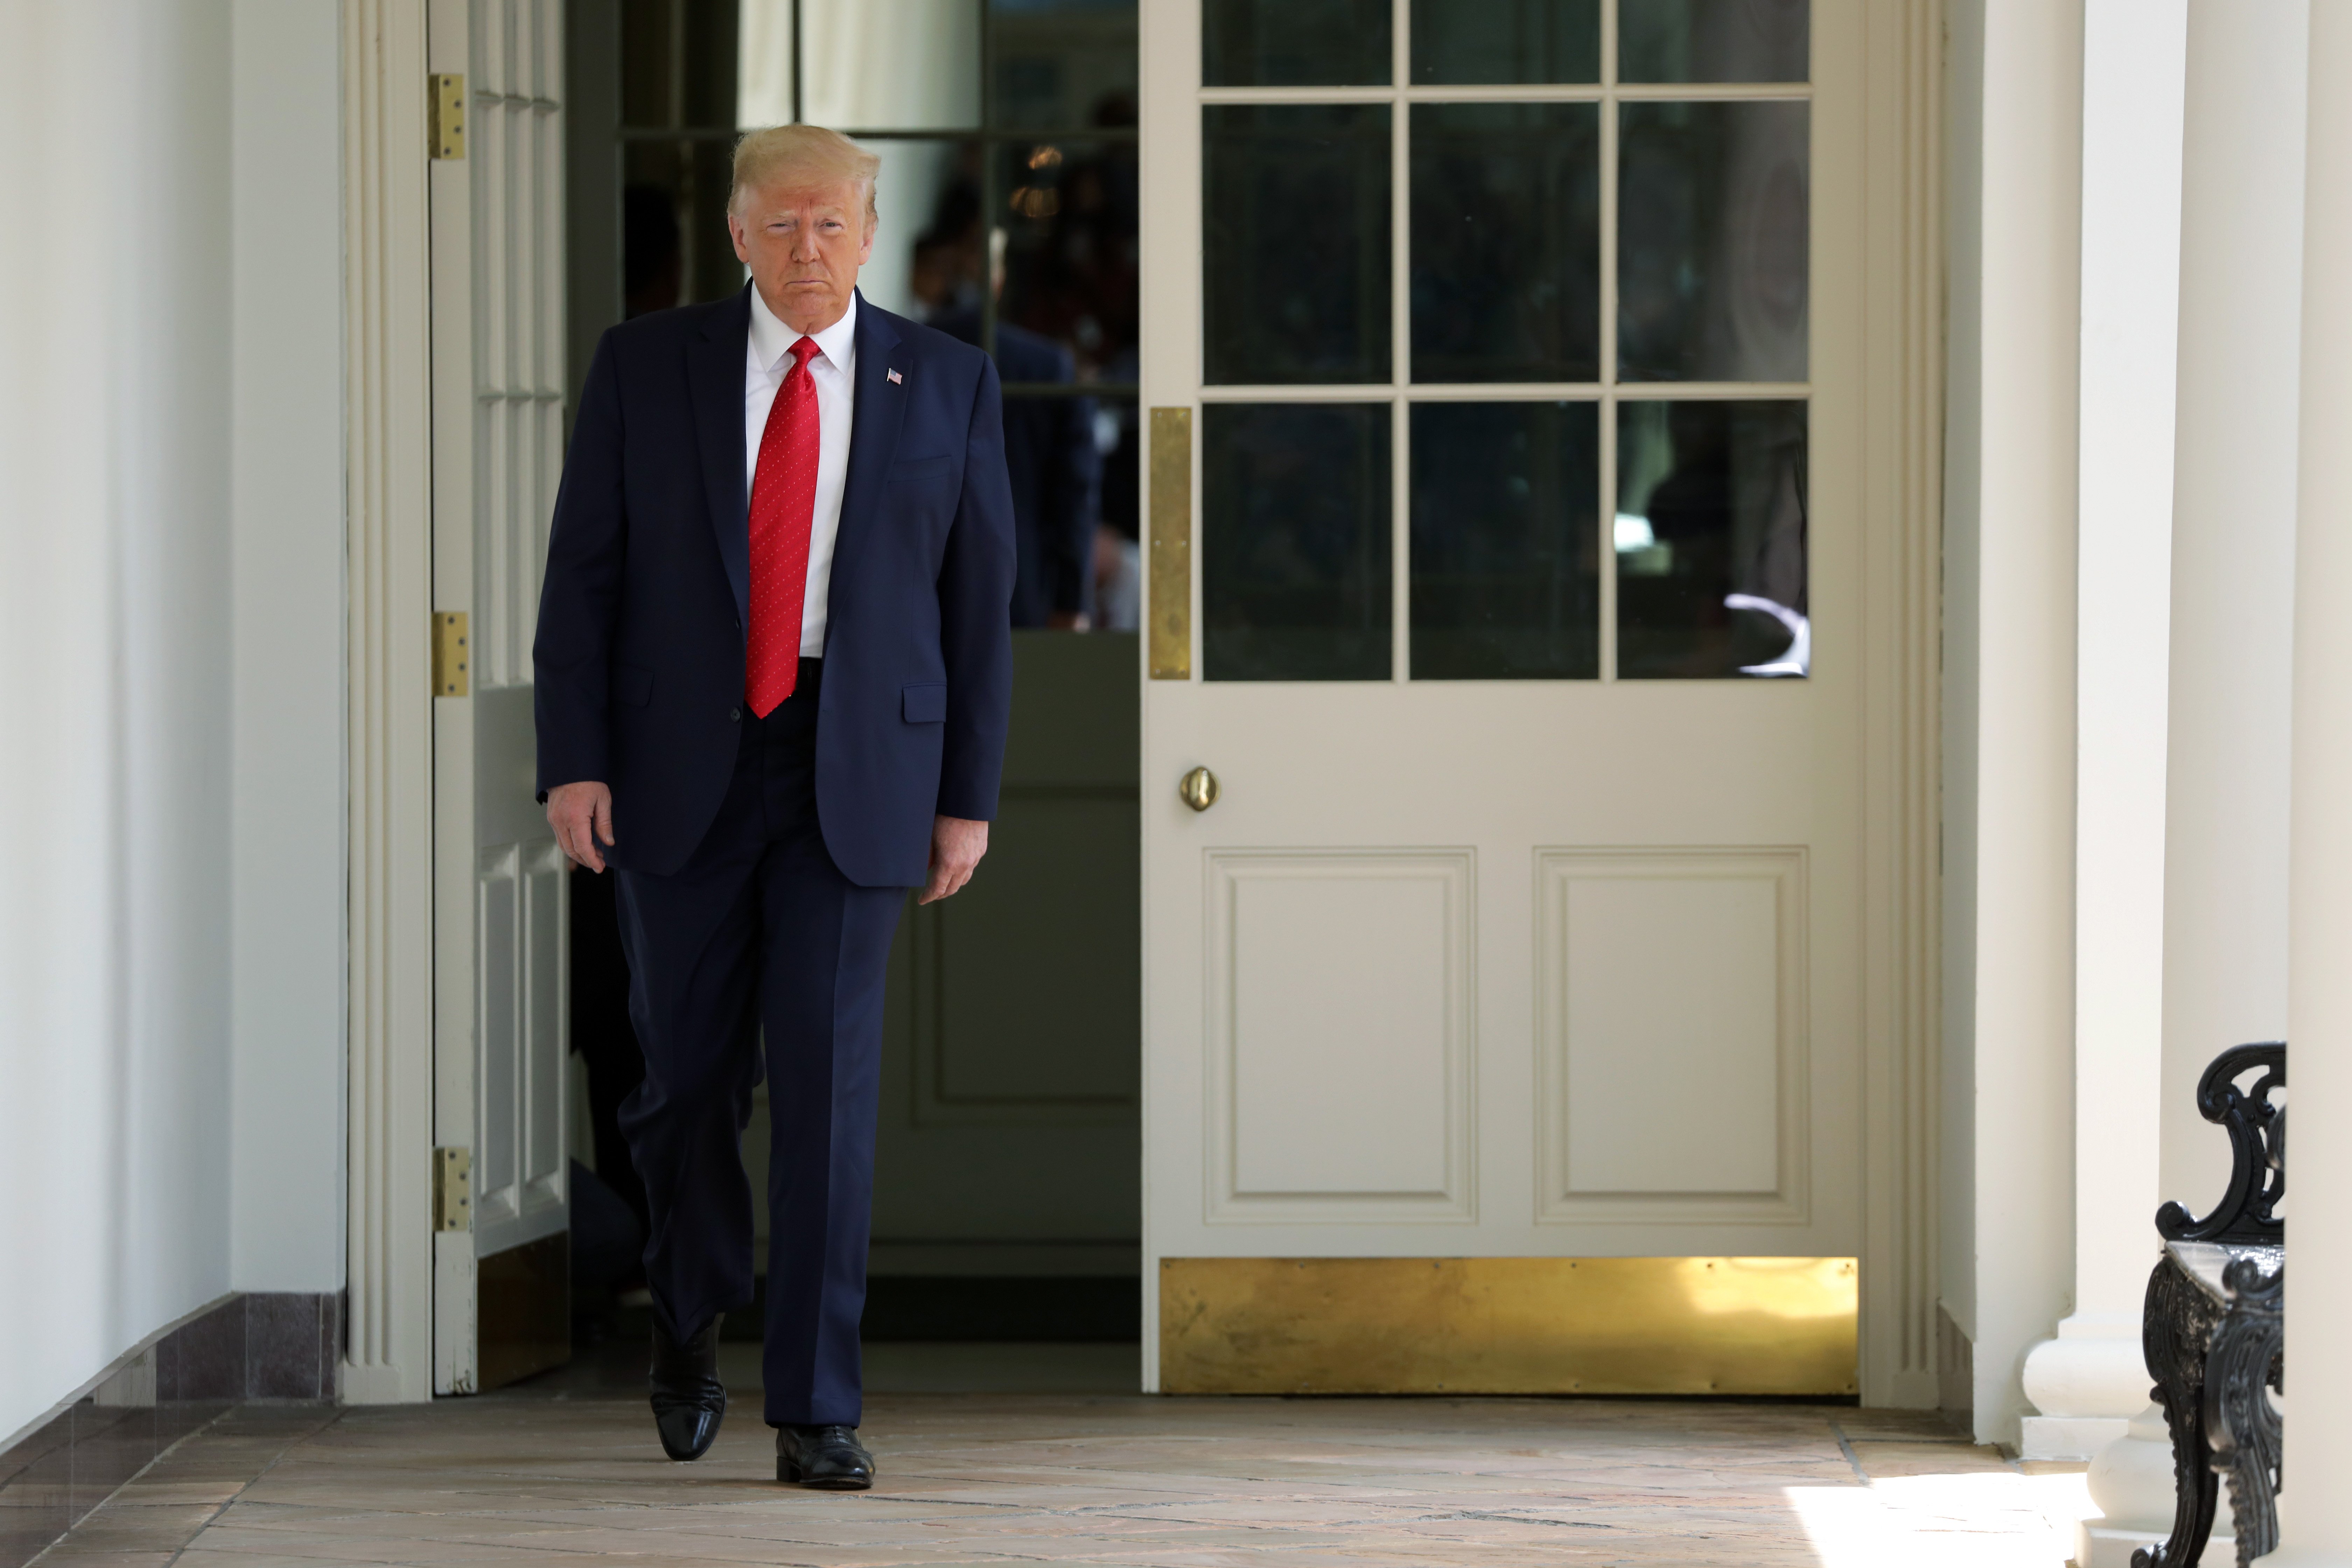 WASHINGTON, DC - JUNE 16: U.S. President Donald Trump arrives for an event in the Rose Garden on “Safe Policing for Safe Communities”, at the White House June 16, 2020 in Washington, DC. President Trump signed an executive order on police reform amid the growing calls after the death of George Floyd. (Photo by Alex Wong/Getty Images)